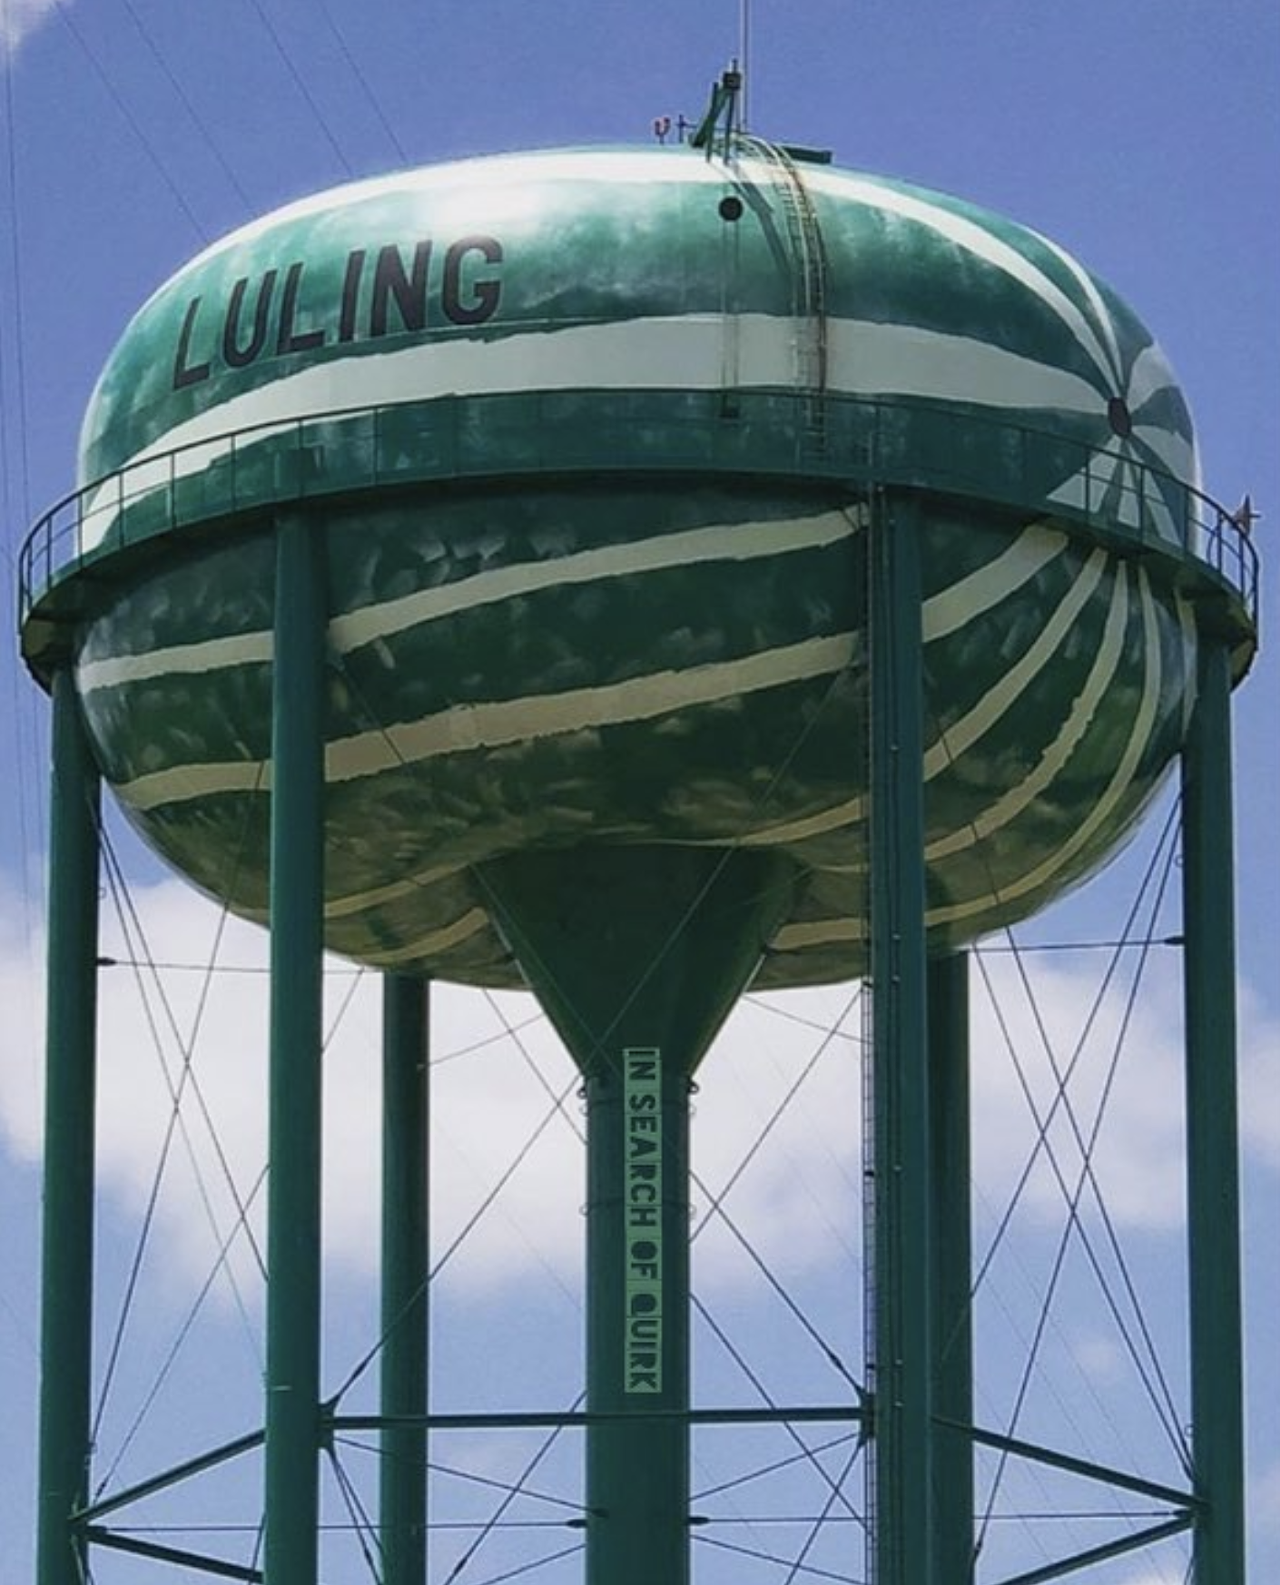 Watermelon Water Tower, Luling, TX
1798 E Pierce St., Luling, roadsideamerica.com
Along Highway 183, another high-flying fruit can be spotted in the sky. This 154-foot tower contains some of the water that helps grow Luling’s 50 pound watermelons.
Photo via Instagram /  insearchofquirk